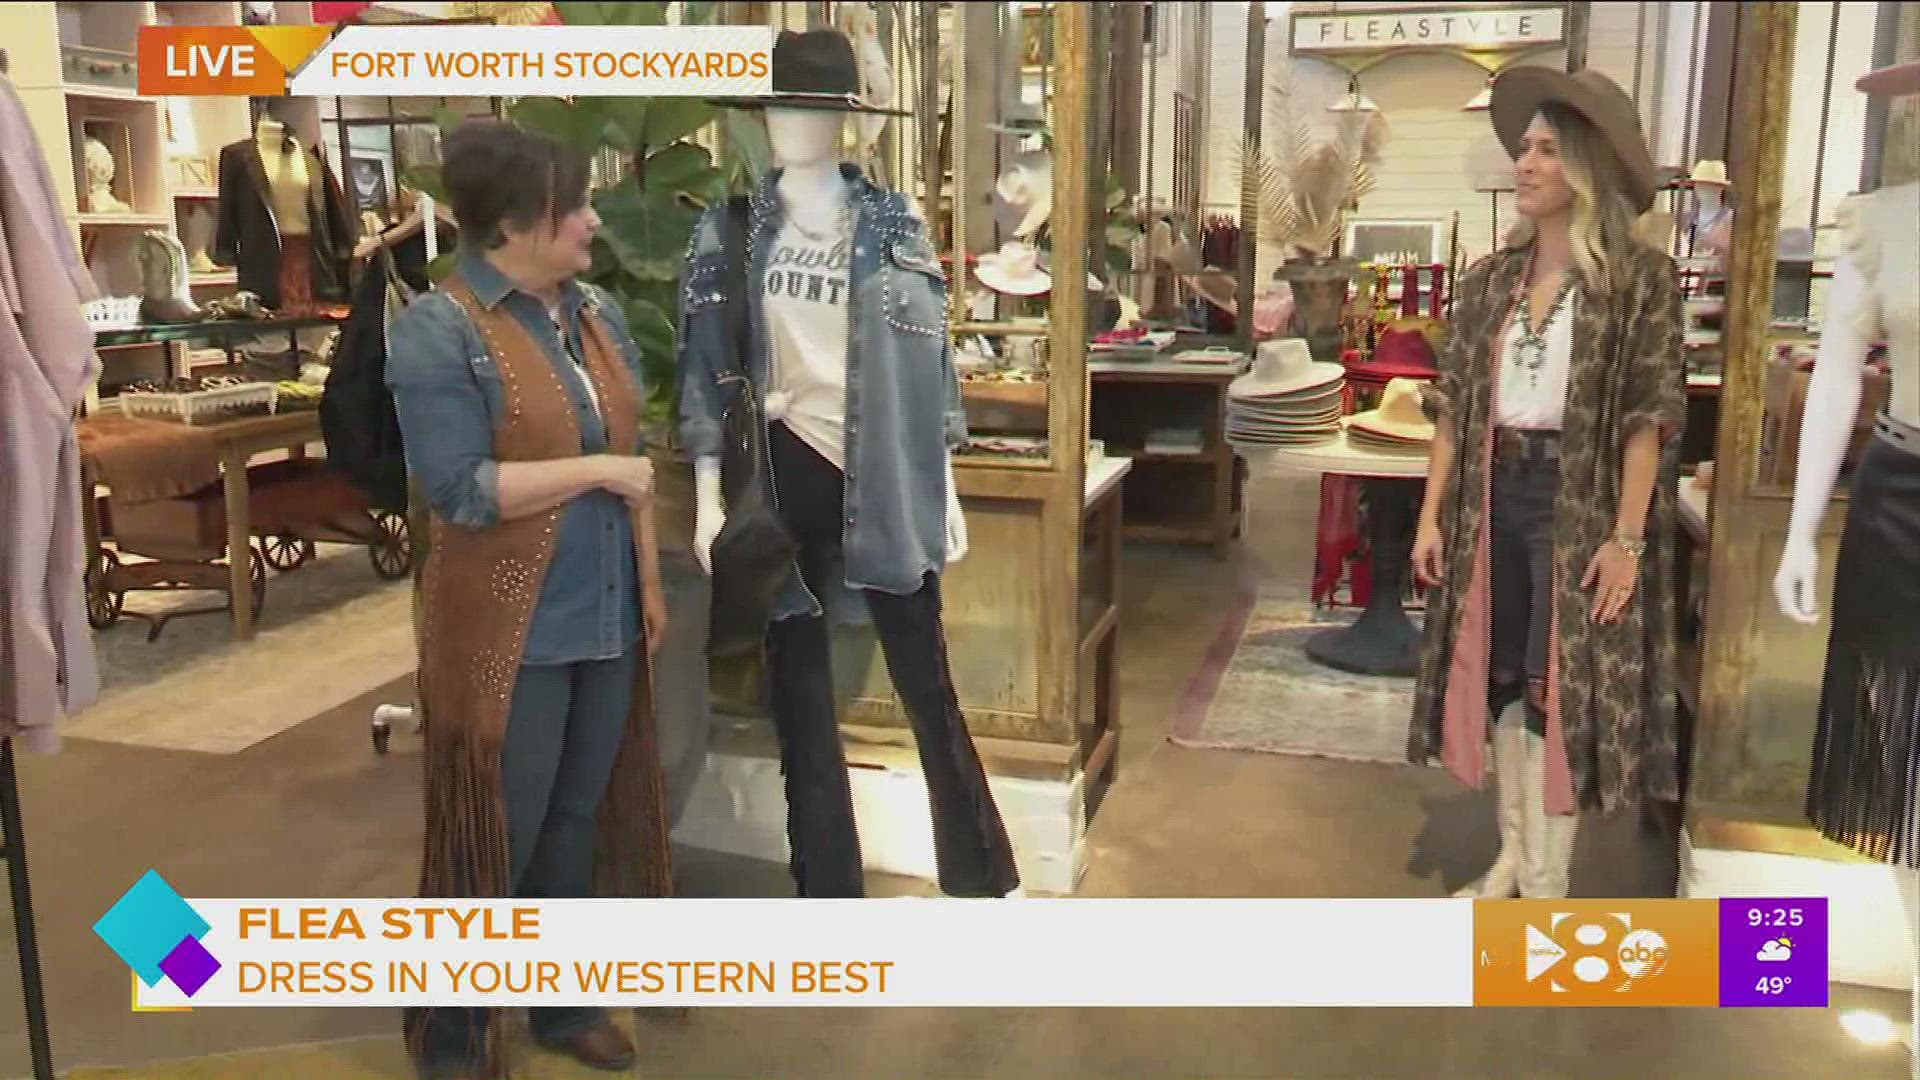 Paige gets the latest in western fashion trends at Flea Style in the Fort Worth Stockyards